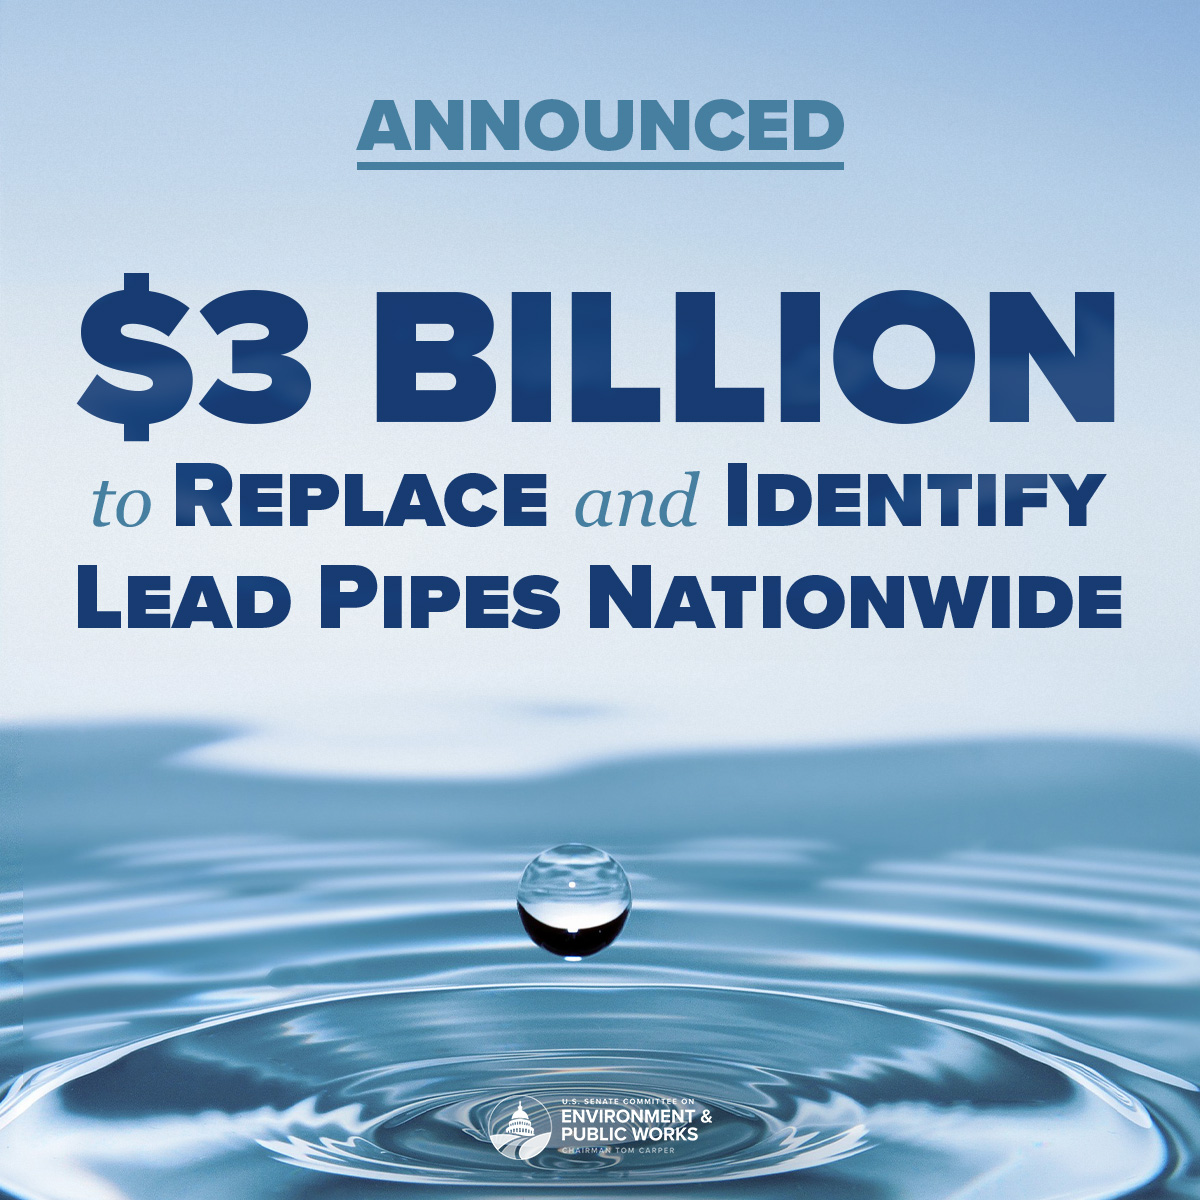 A major clean water win! 🌊💧🙌 Thanks to the historic Bipartisan Infrastructure Law, @EPA is announcing $3 billion to identify and replace toxic lead pipes nationwide.